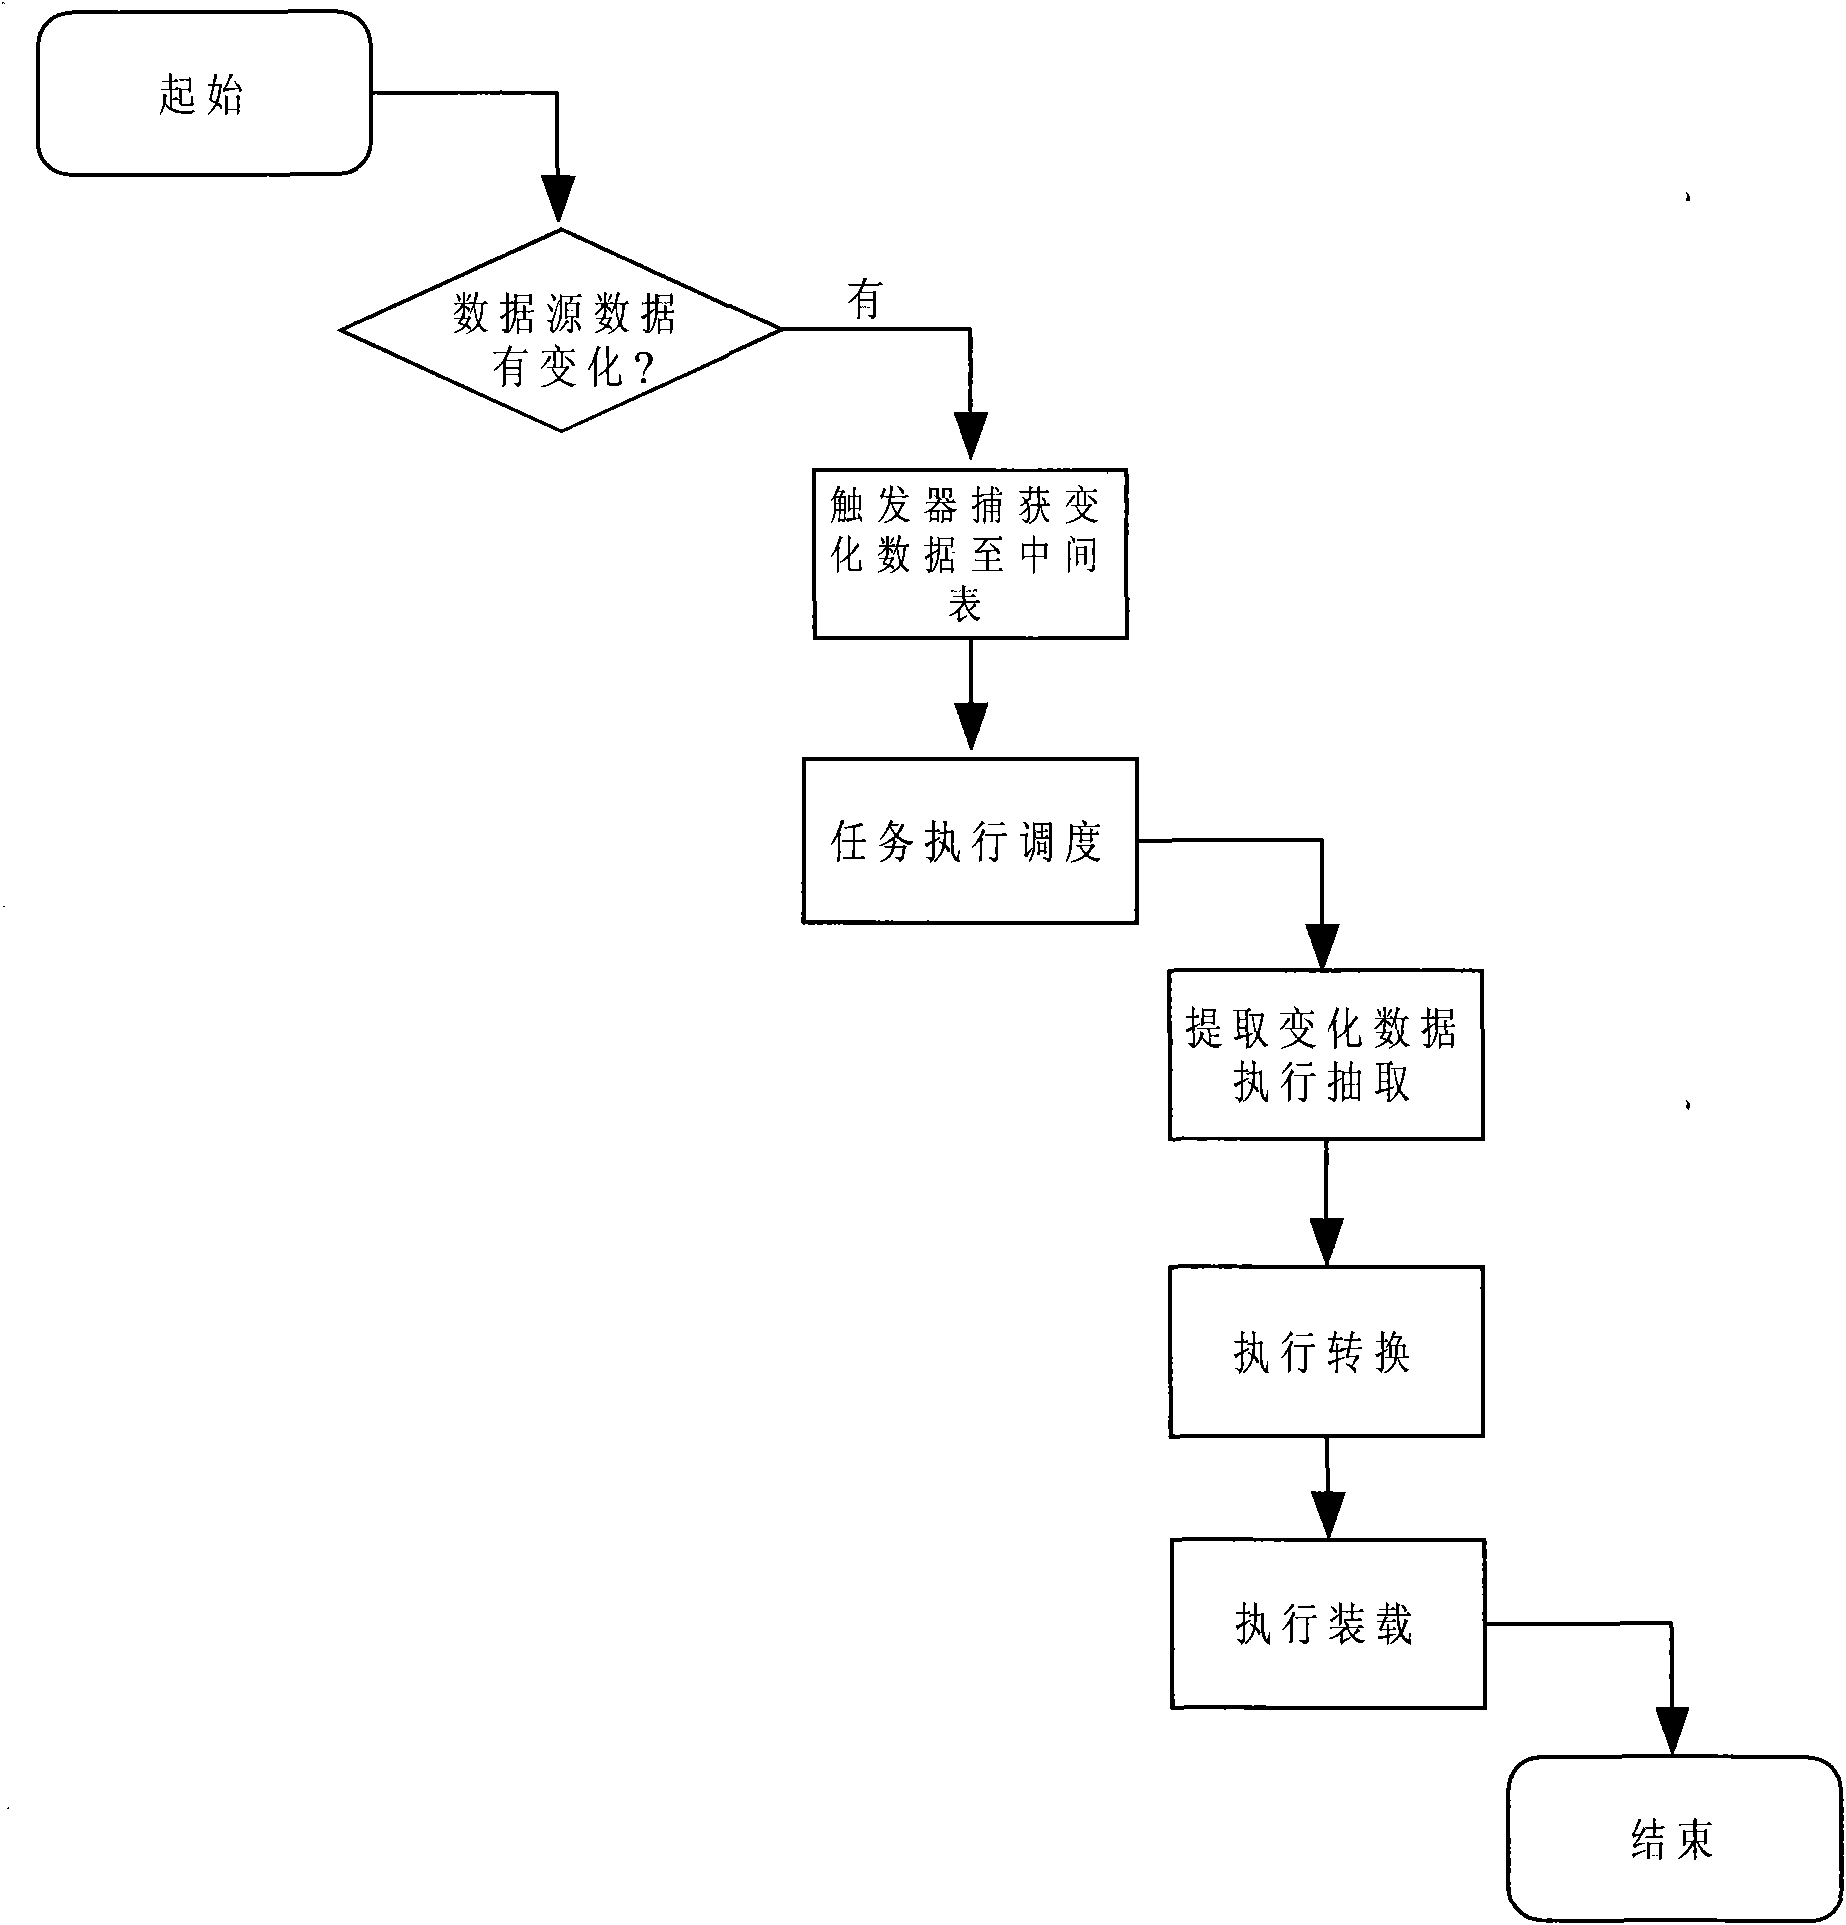 Data increment extraction method based on trigger